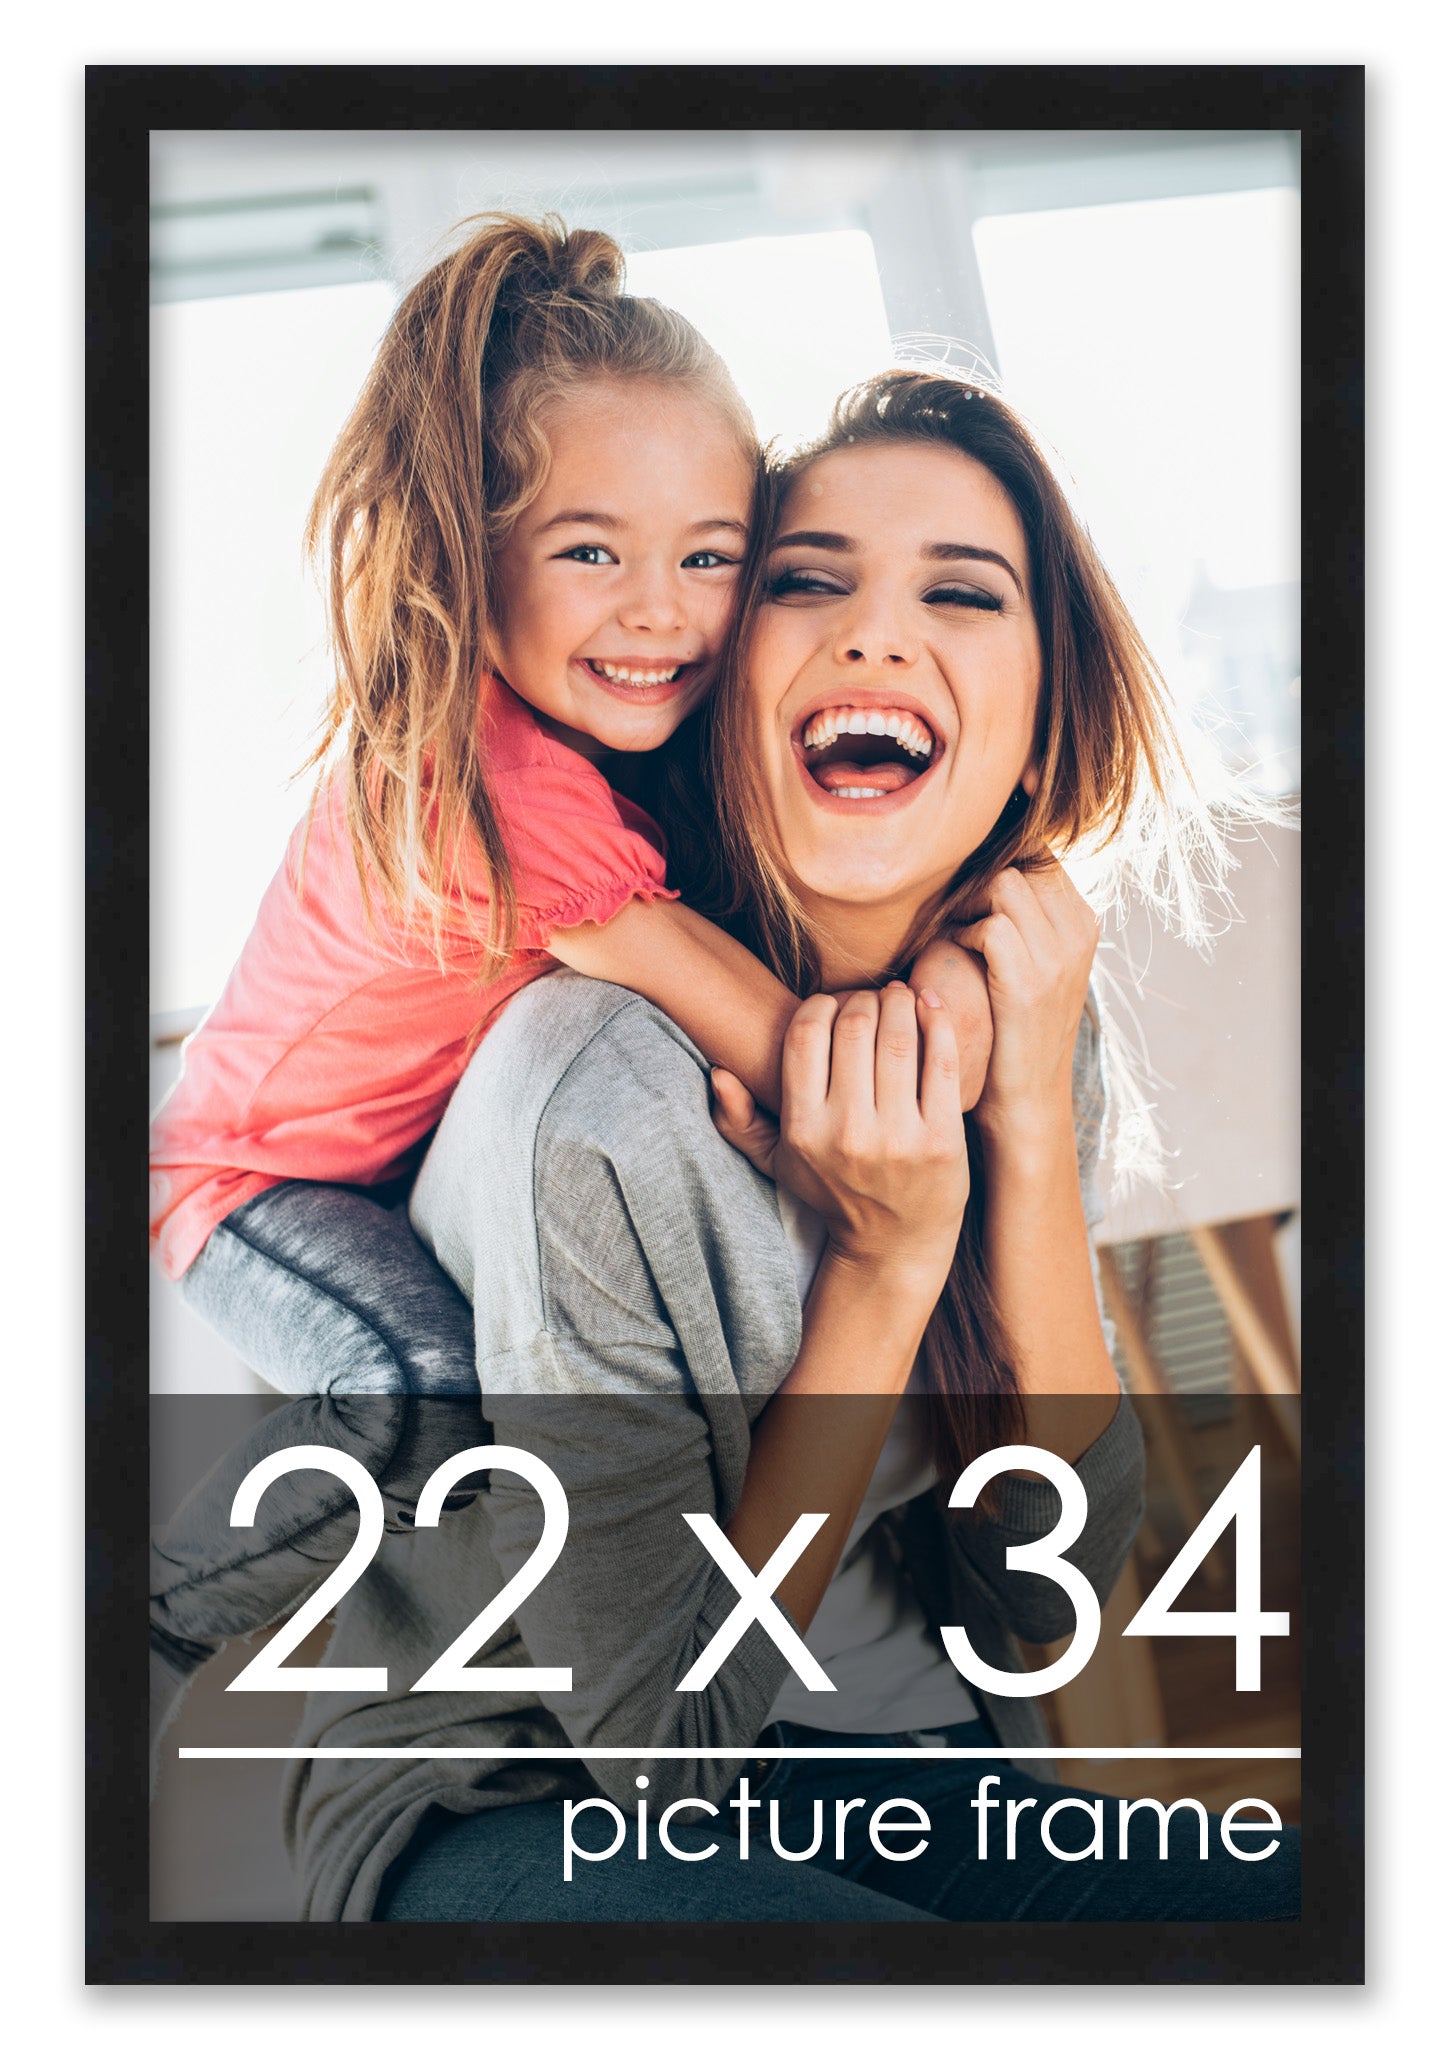 22x34 Frame Black Solid Wood Picture Frame - UV Acrylic Plexiglass, Foam Board Backing aaa Hanging Hardware Included